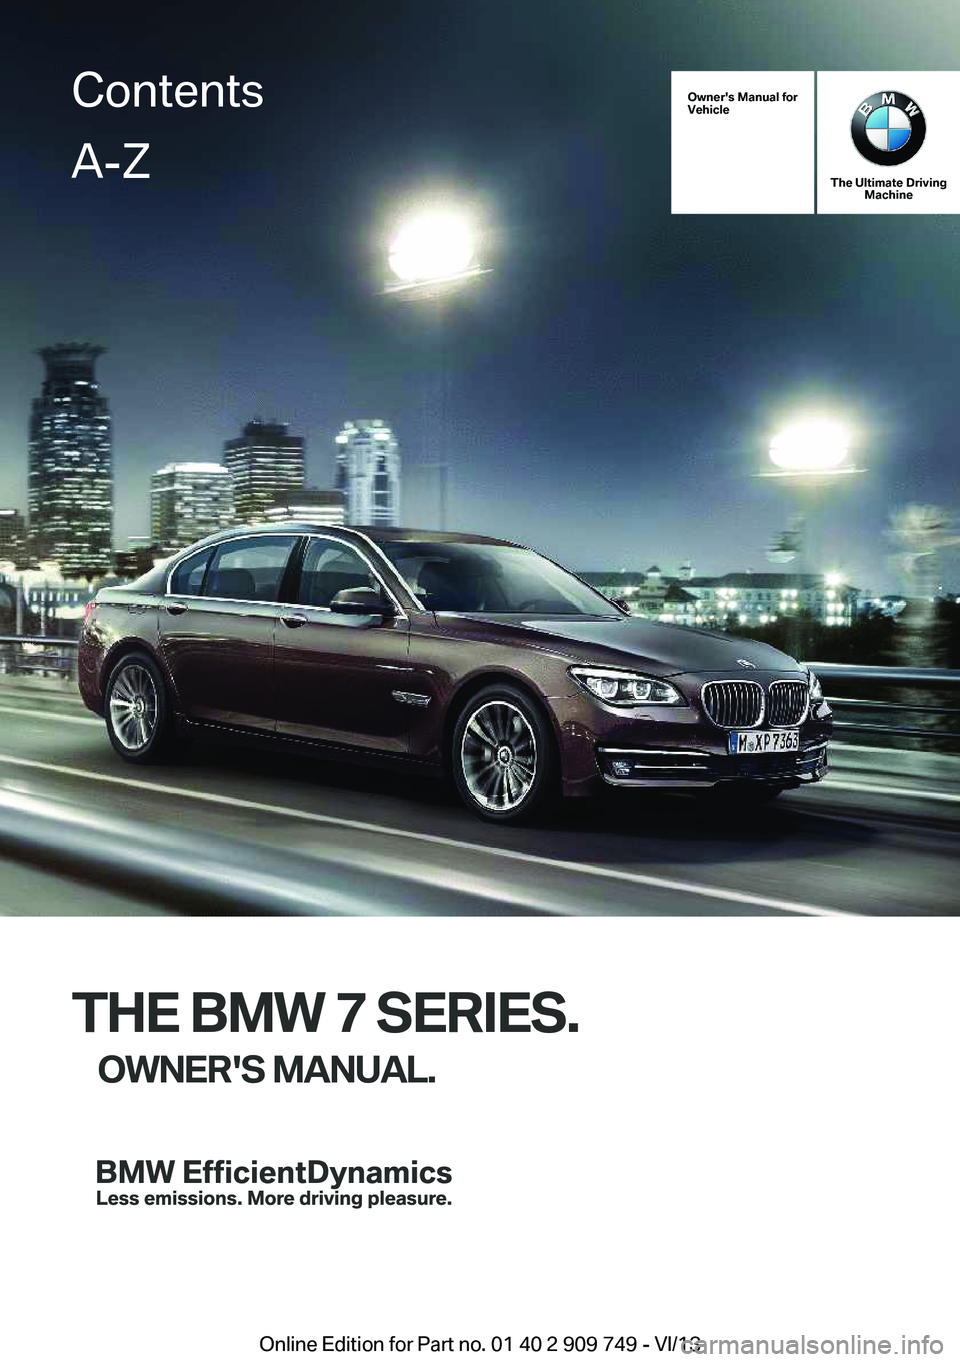 BMW 740LI 2014  Owners Manual Owner's Manual for
Vehicle
The Ultimate Driving Machine
THE BMW 7 SERIES.
OWNER'S MANUAL.
ContentsA-Z
Online Edition for Part no. 01 40 2 909 749 - VI/13   